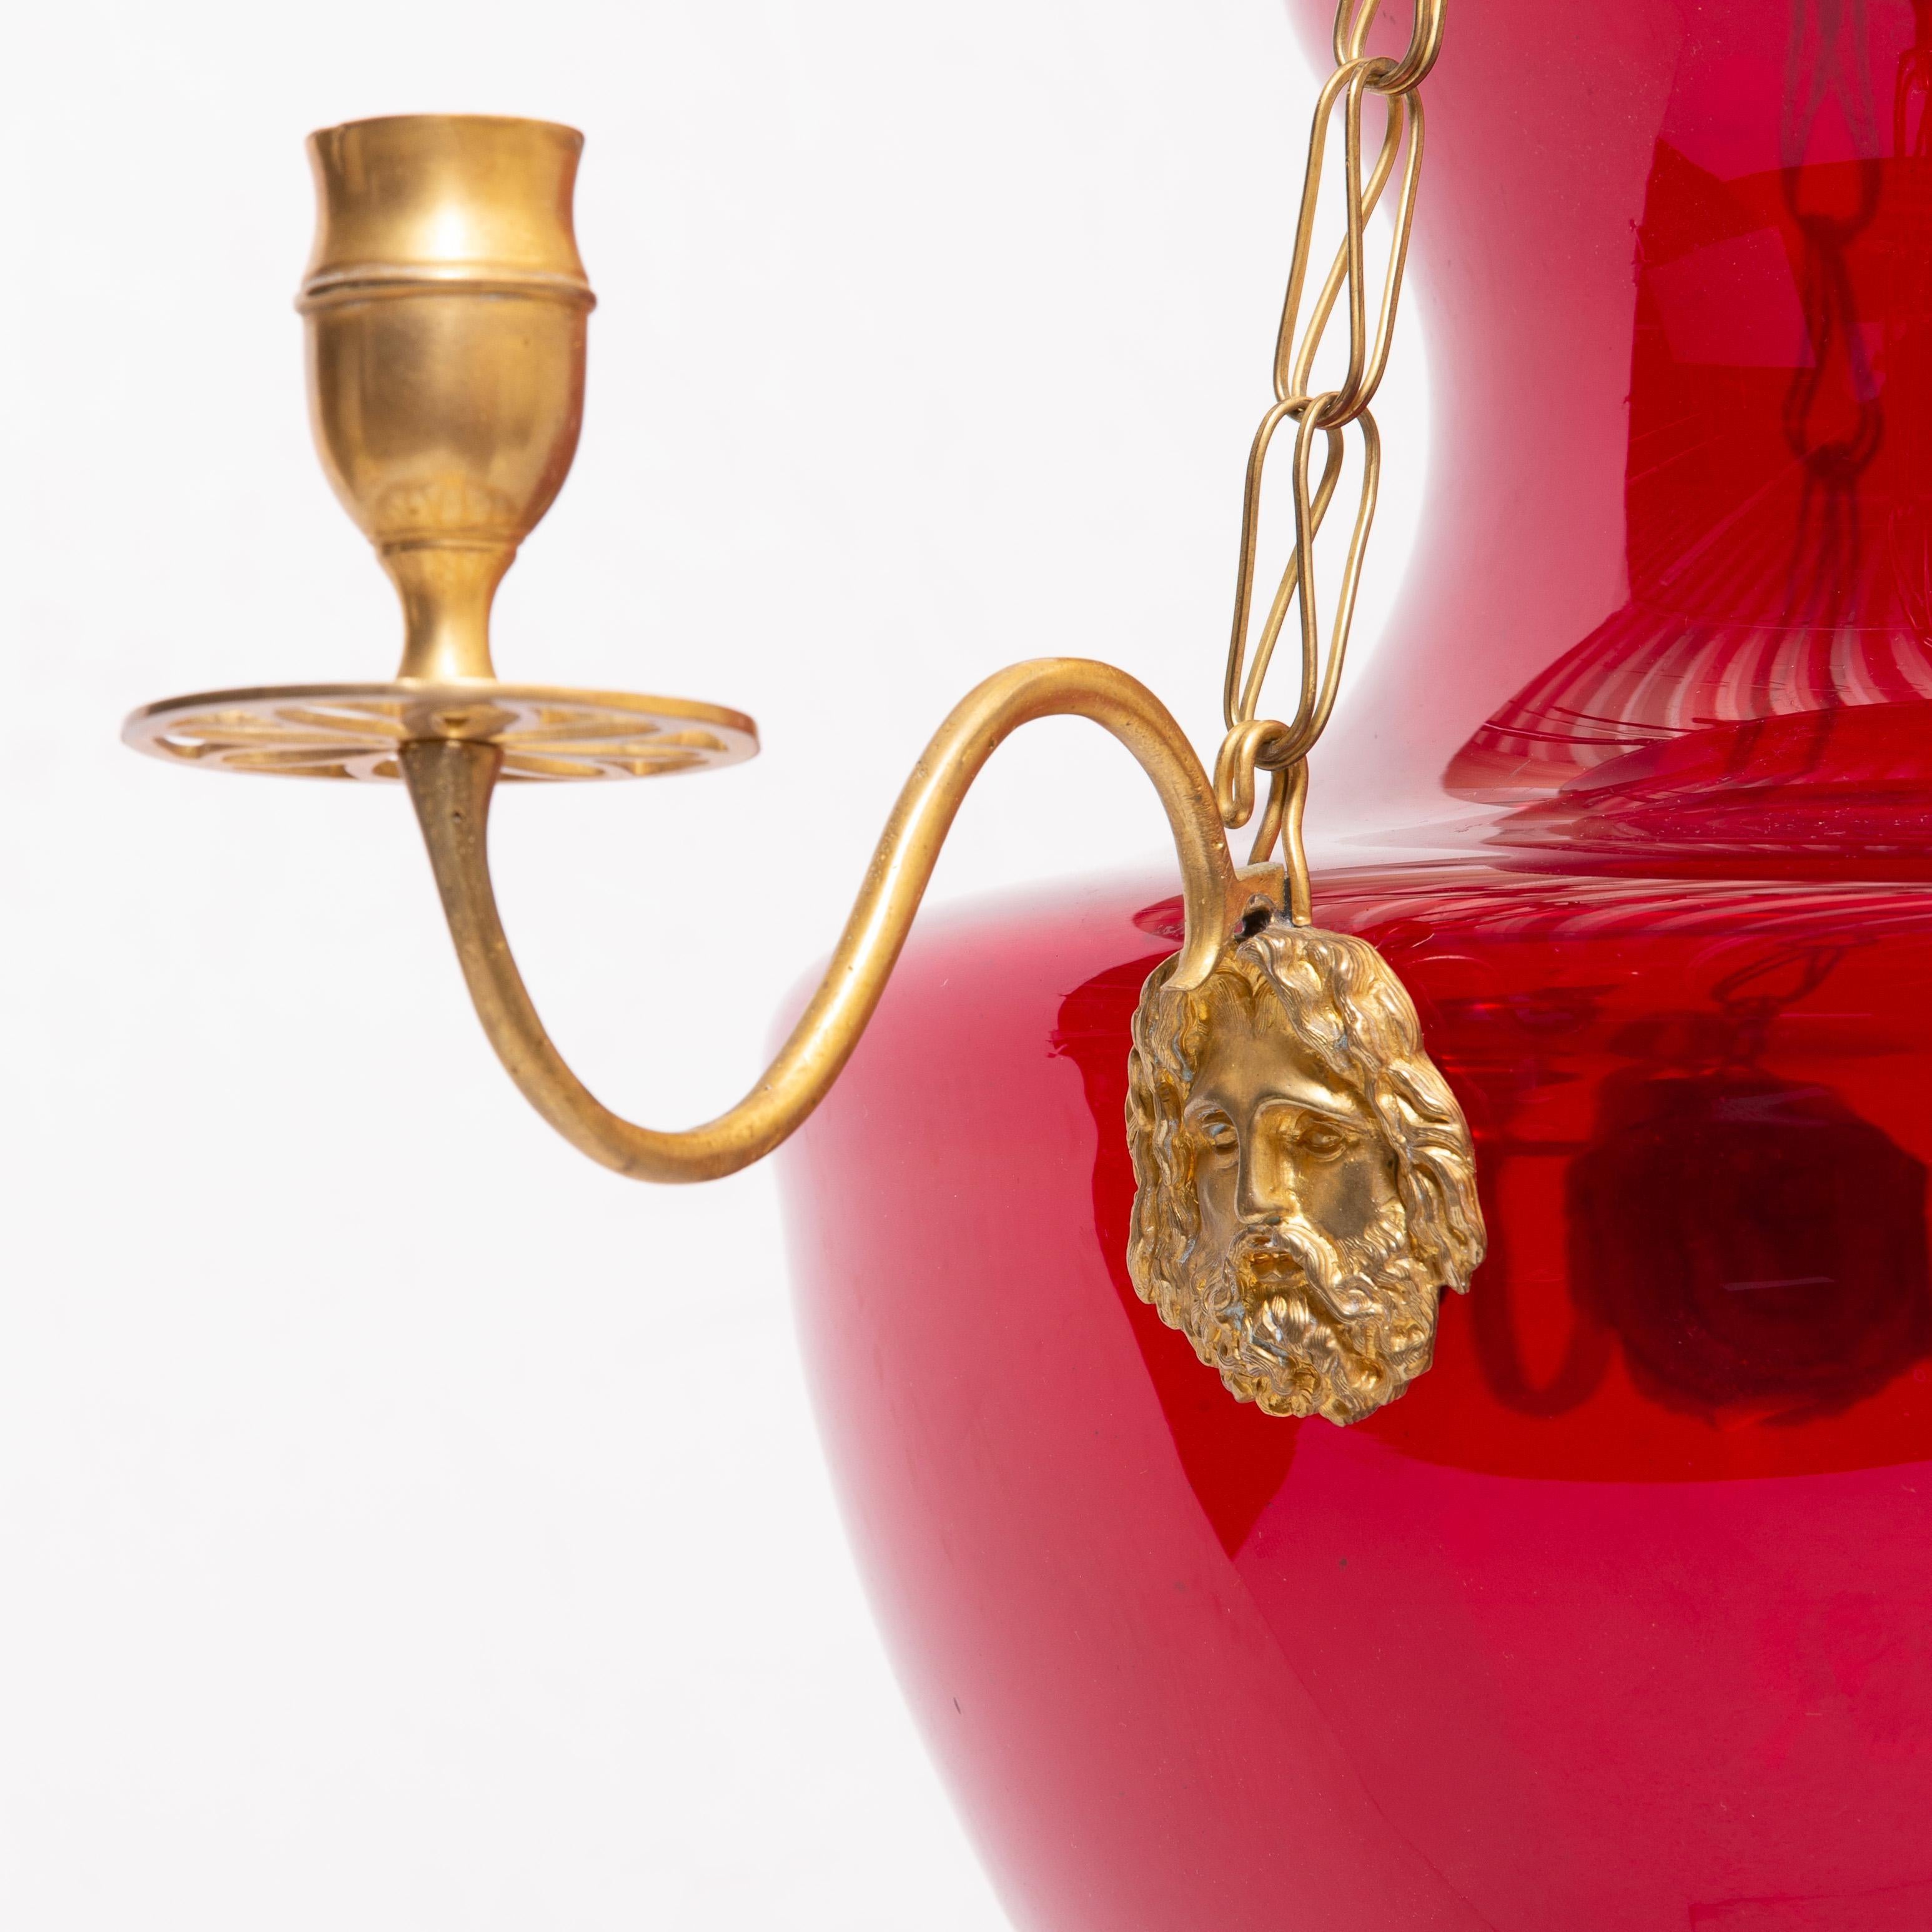 Early 19th century Swedish or Russian ruby glass chandelier or lantern

-- Amphora shape with three neoclassical Bacchus masks and candle arms
with acorn and laurel leaf finials in Ormolu.